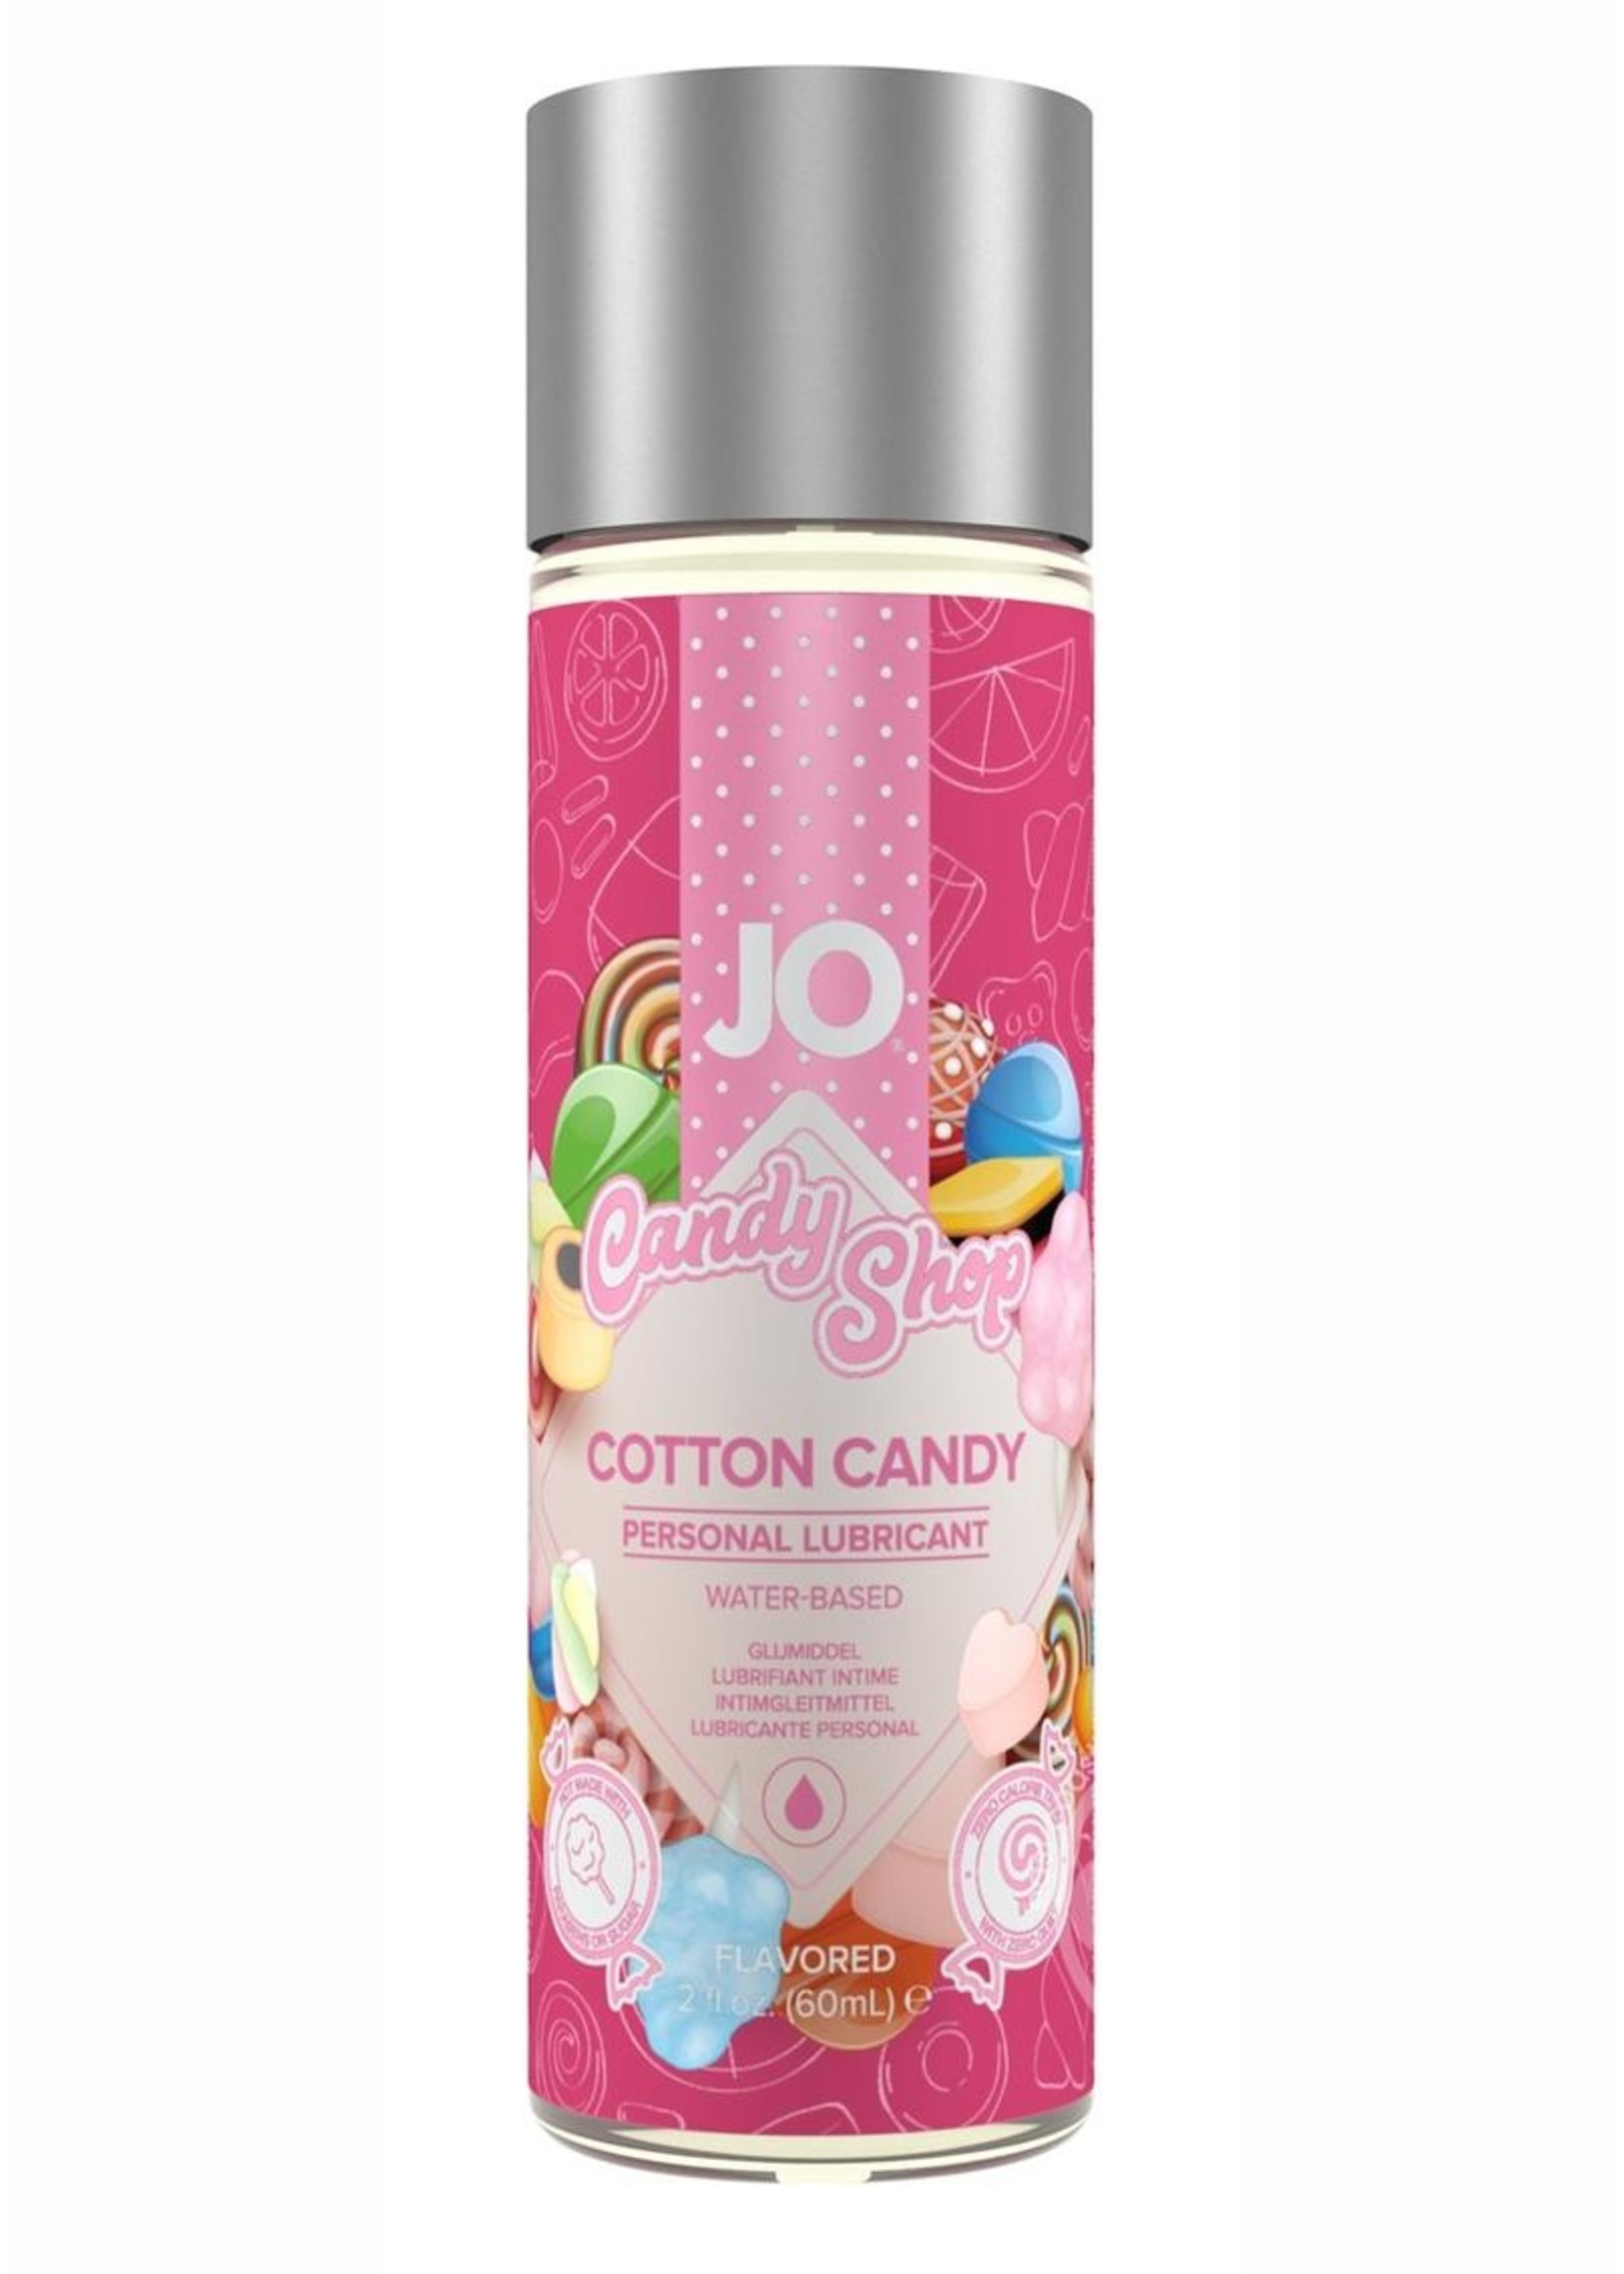 JO H2O Candy Shop Water Based Flavored Lubricant Cotton Candy 2oz